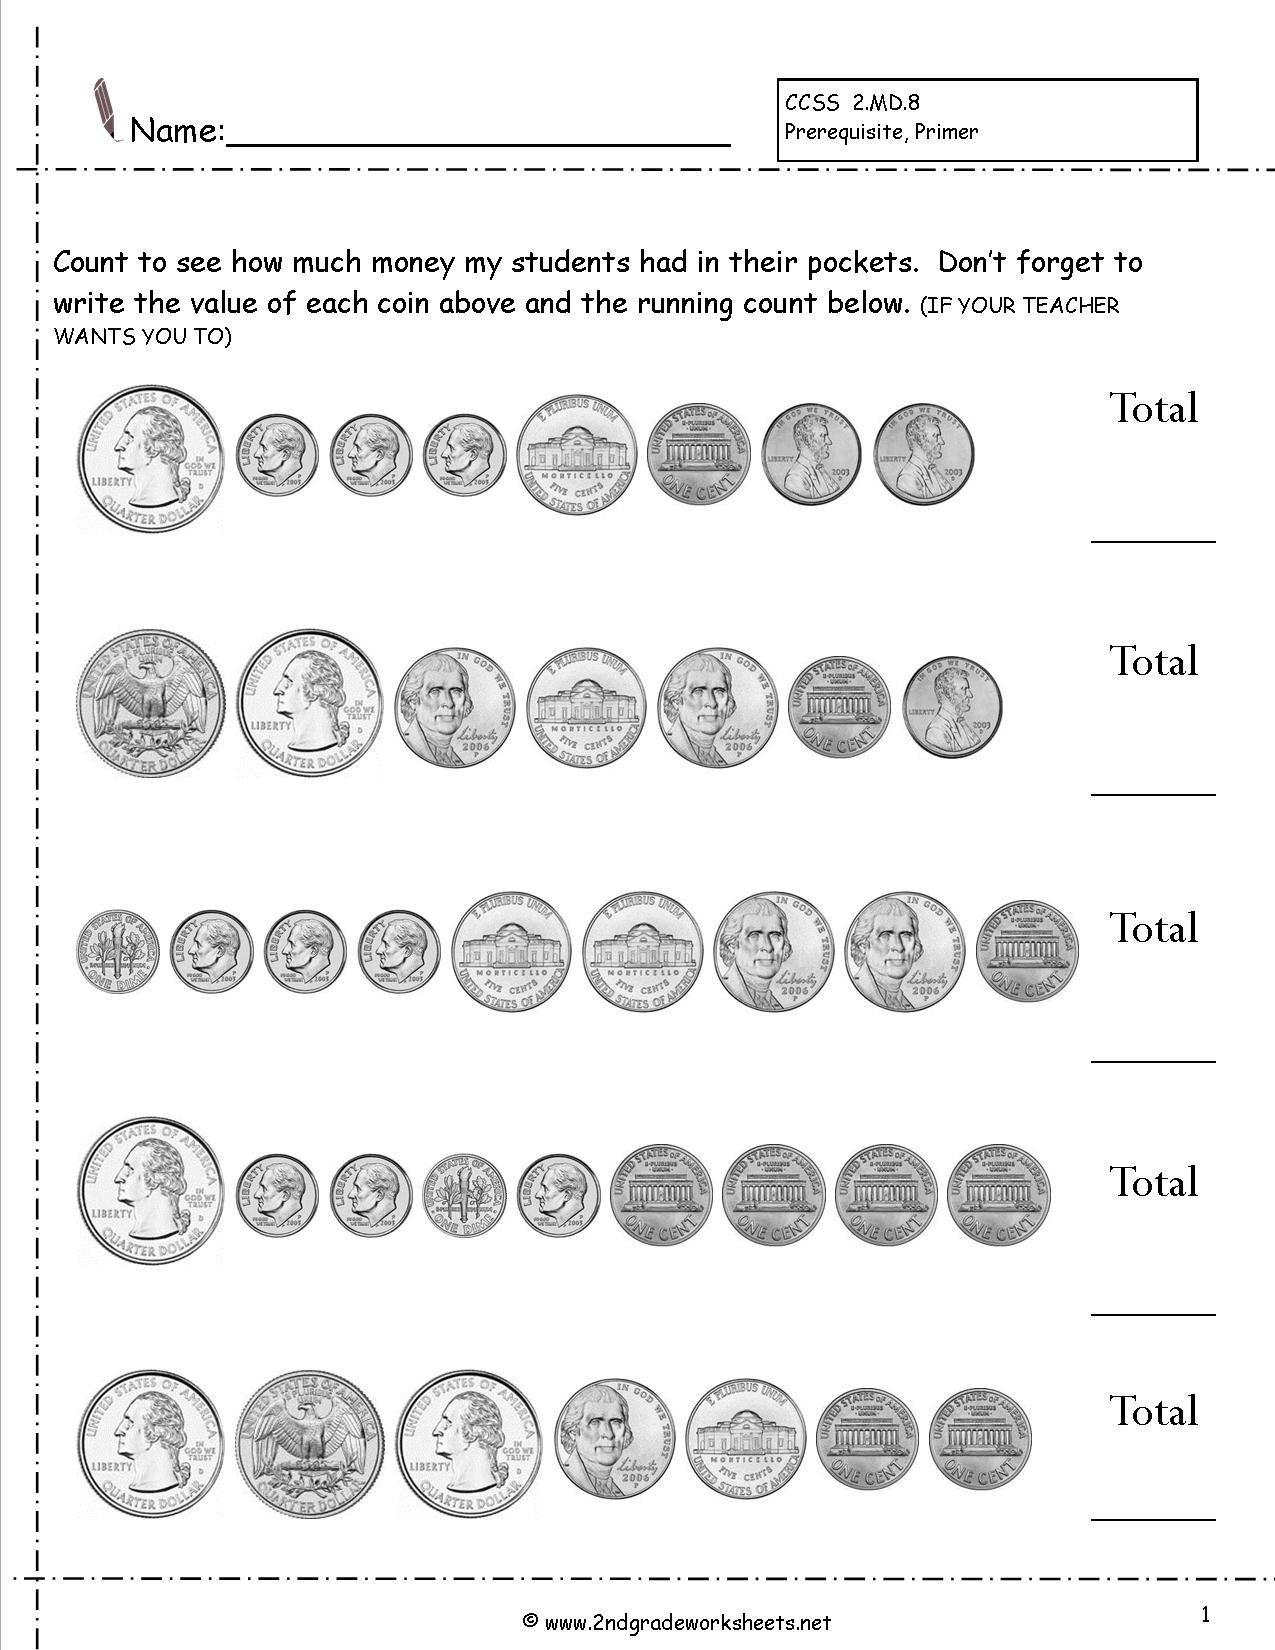 Counting Coins And Money Worksheets And Printouts Along With Coin Values Worksheet